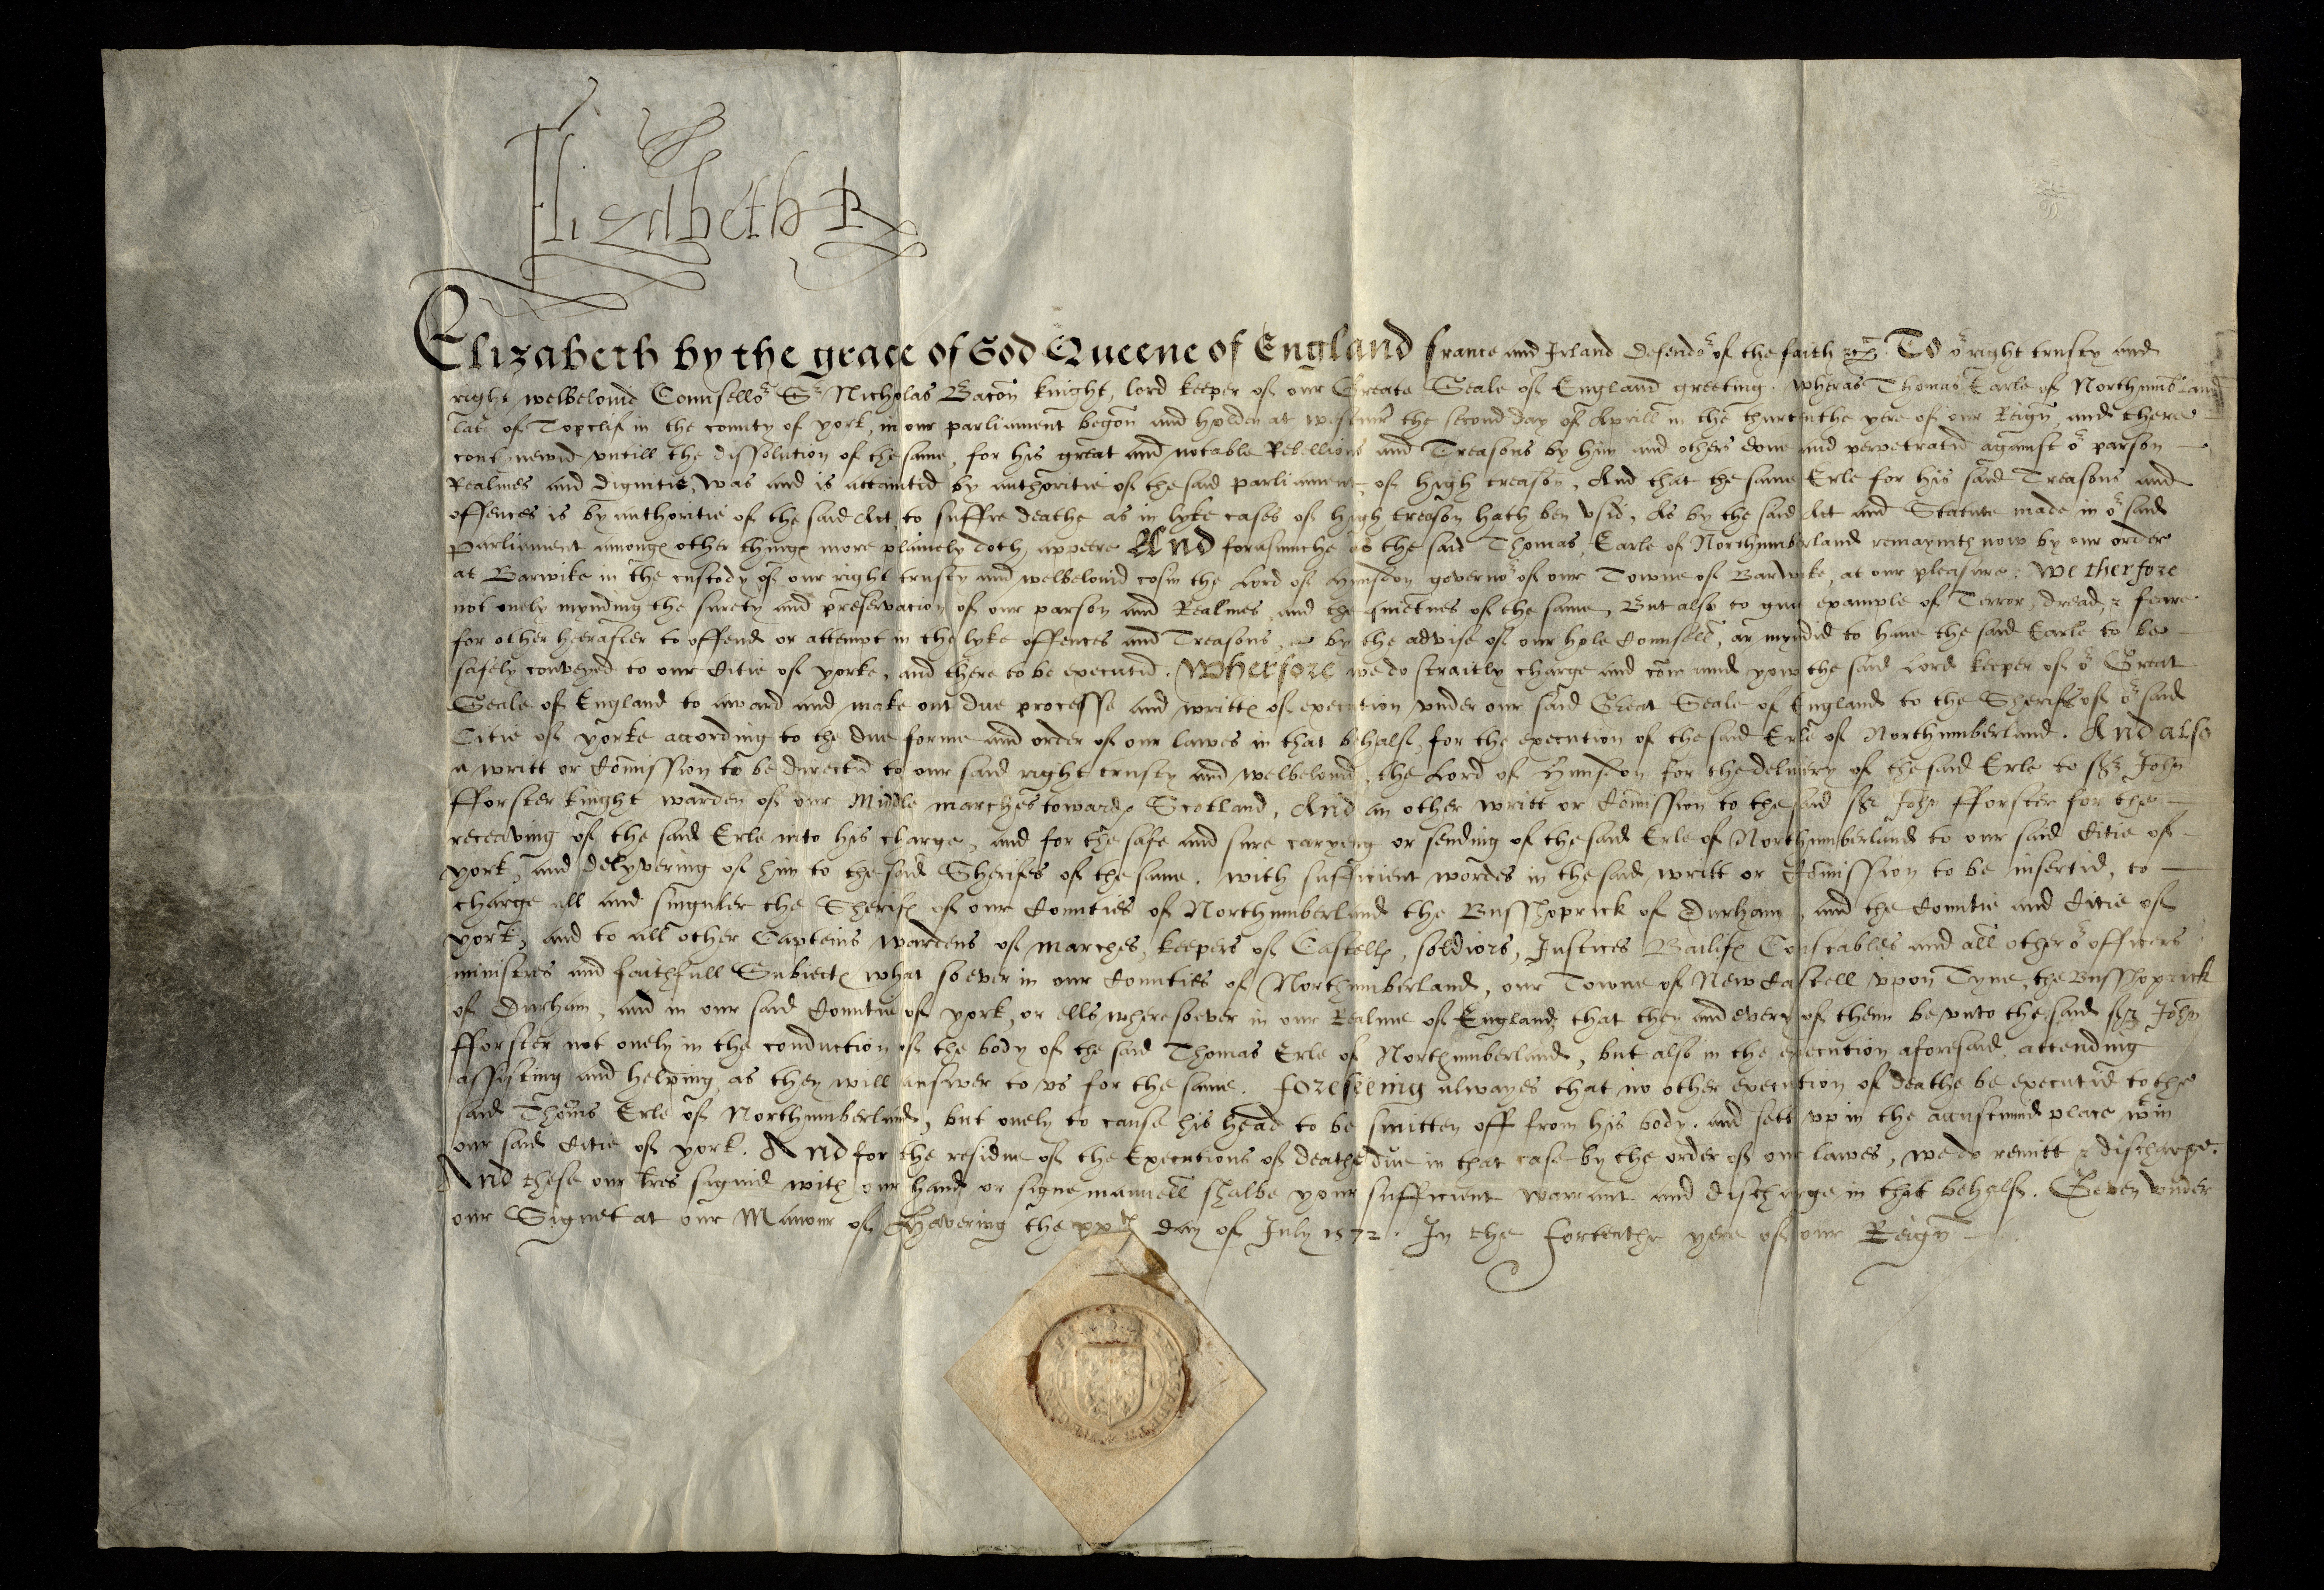 Commission to the Lord Keeper of the Great Seal for the making up of writs for the execution of the 7th Earl of Northumberland in 1572